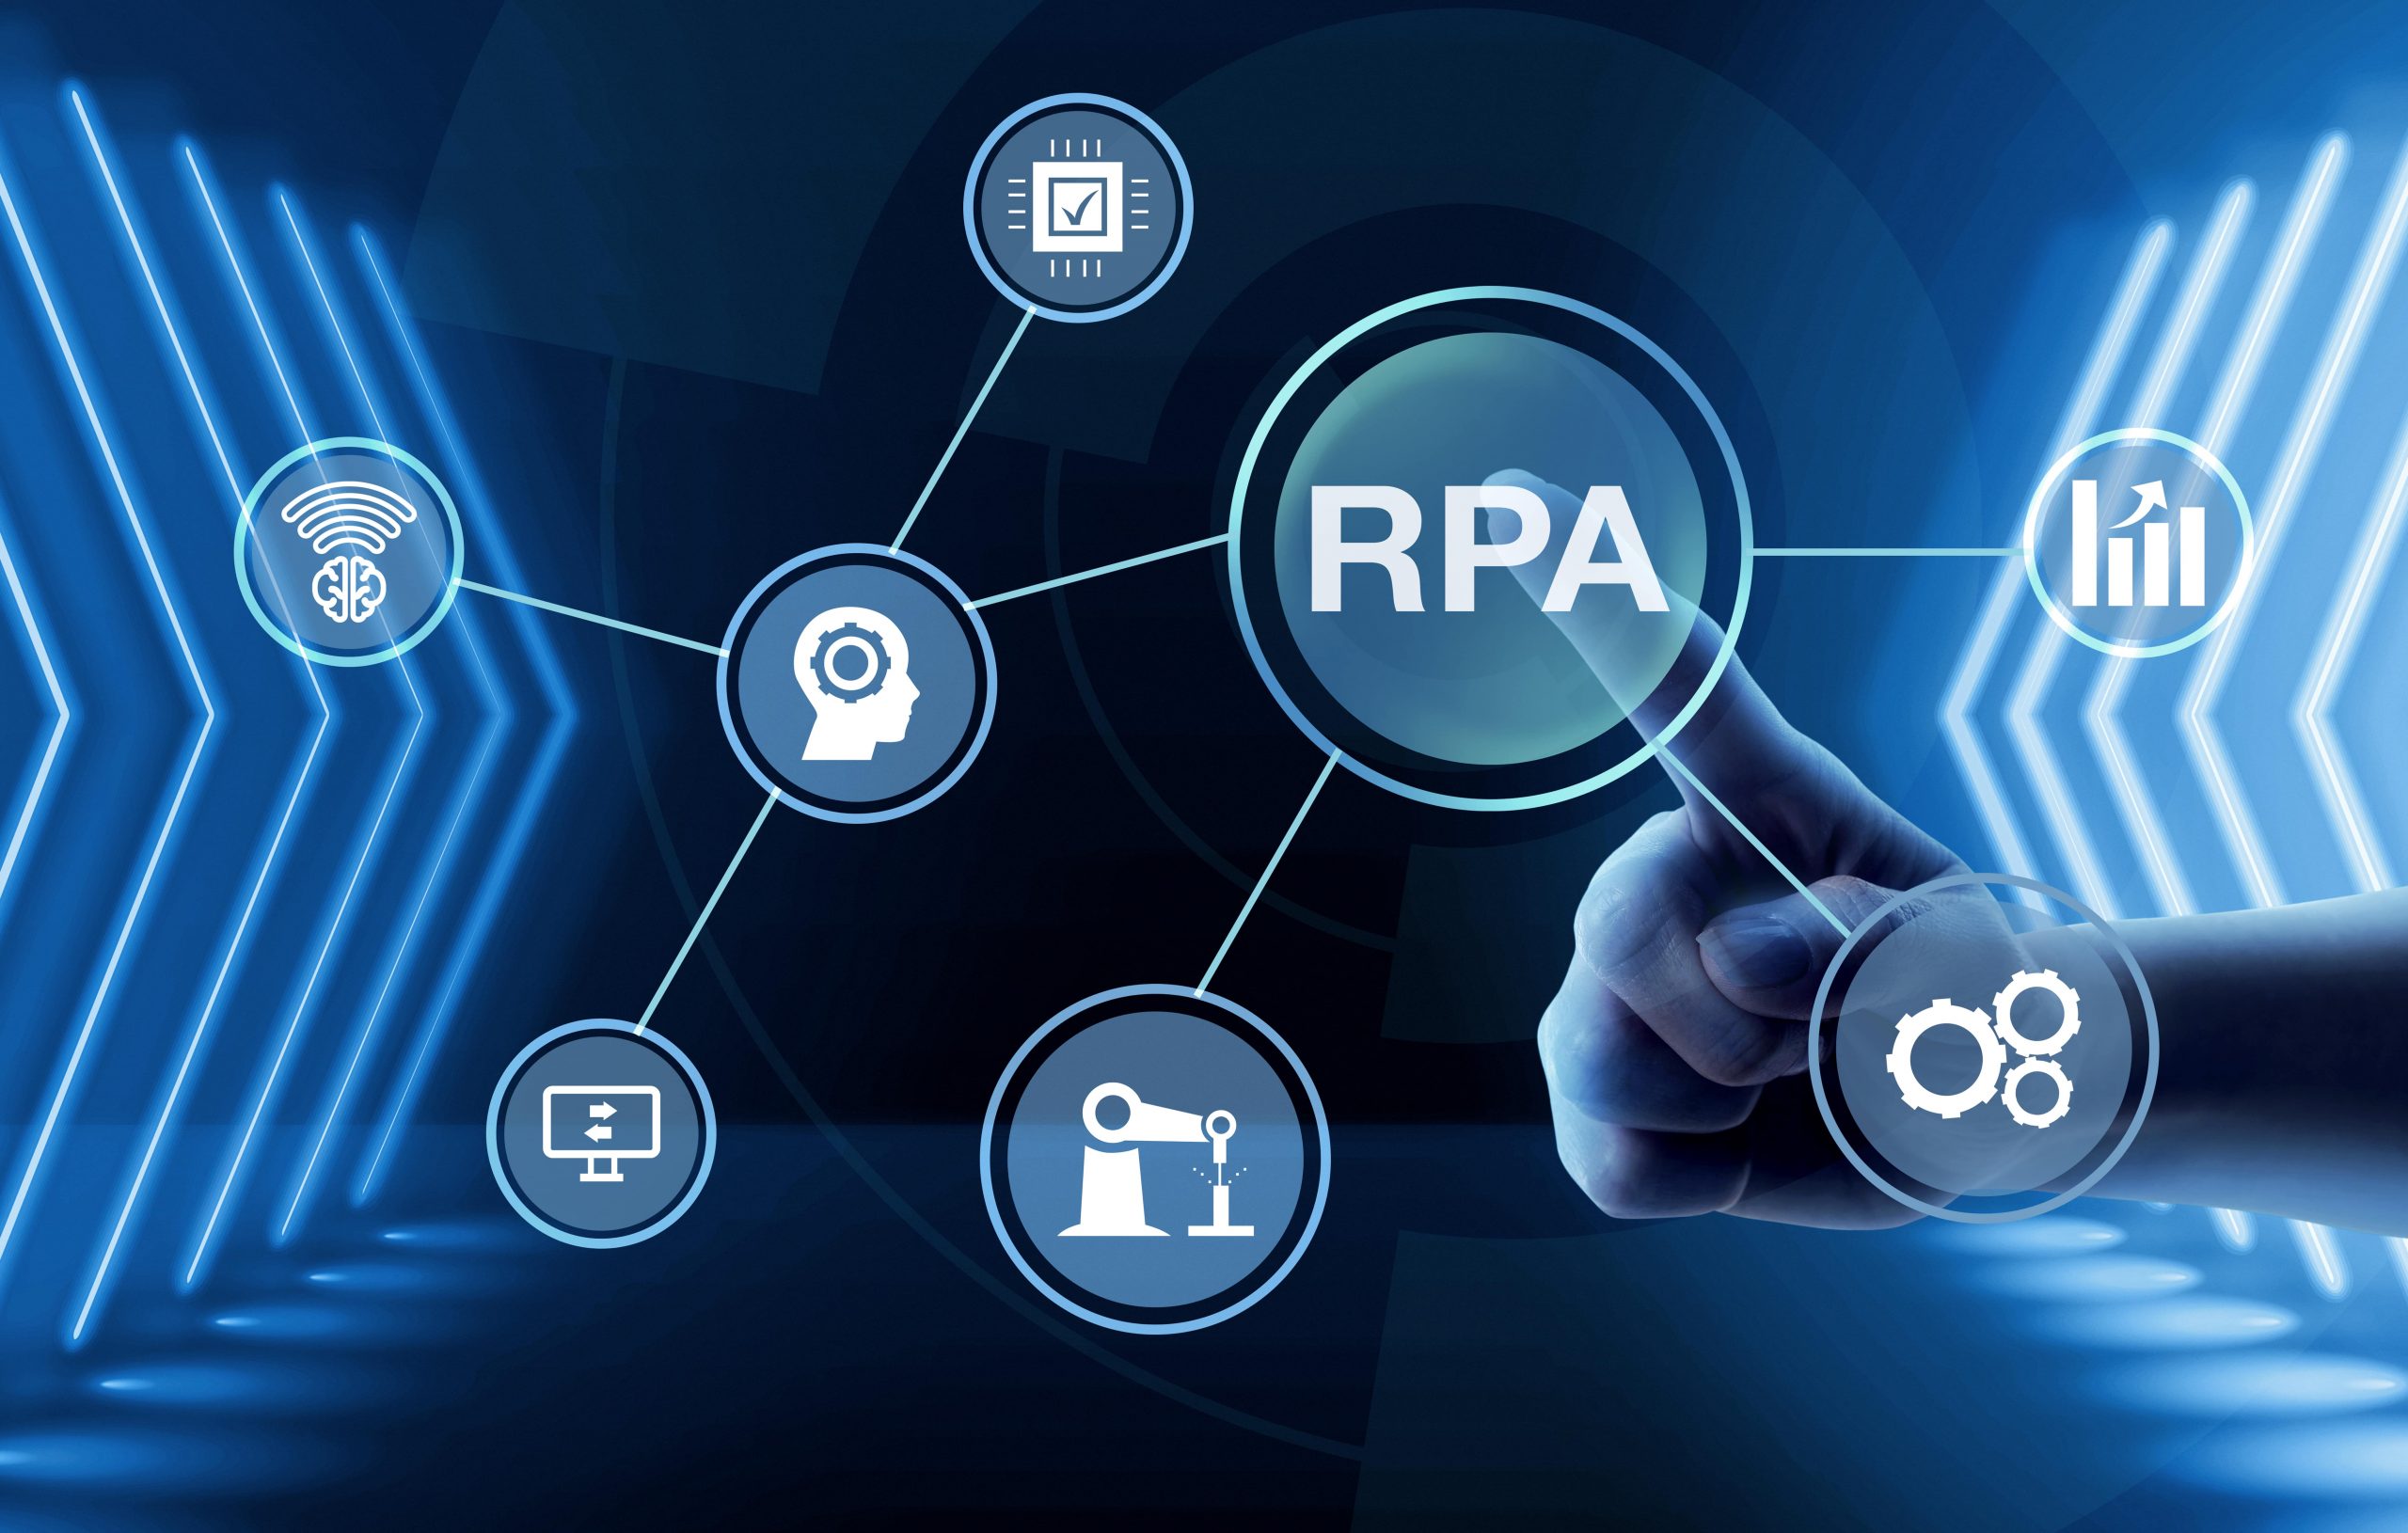 RPA Use Cases